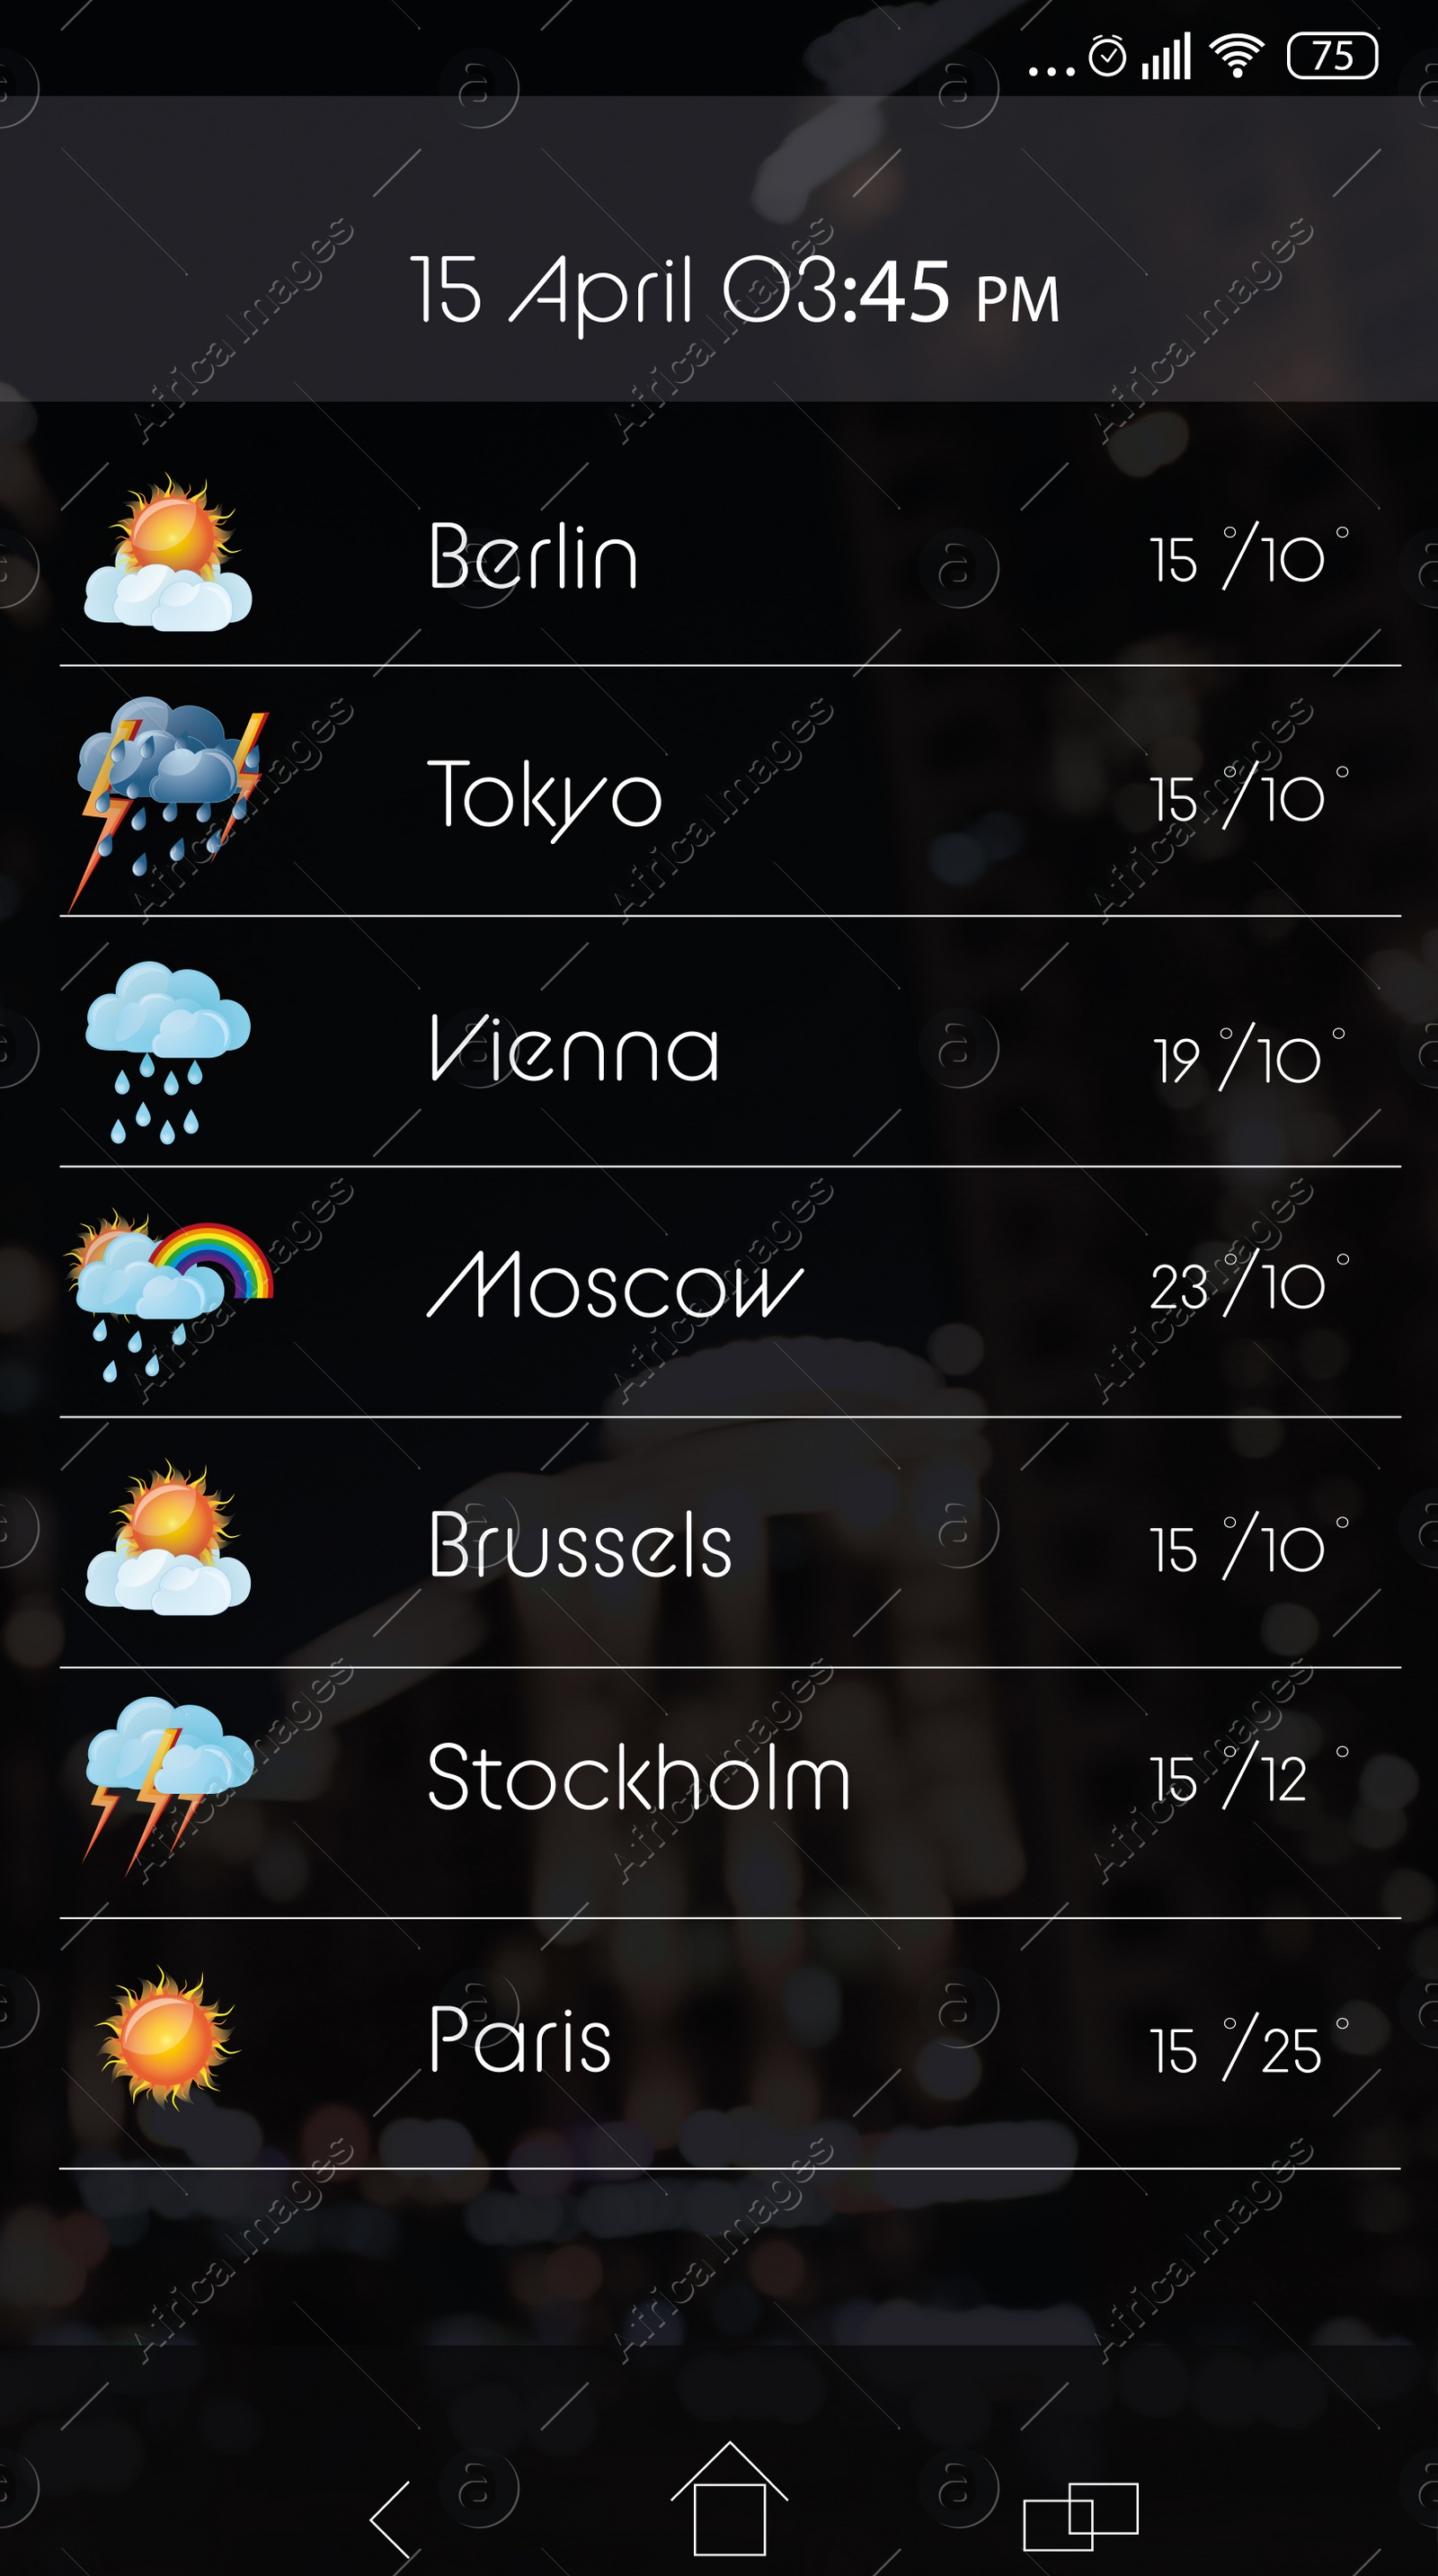 Image of Weather forecast widget on screen. Mobile application